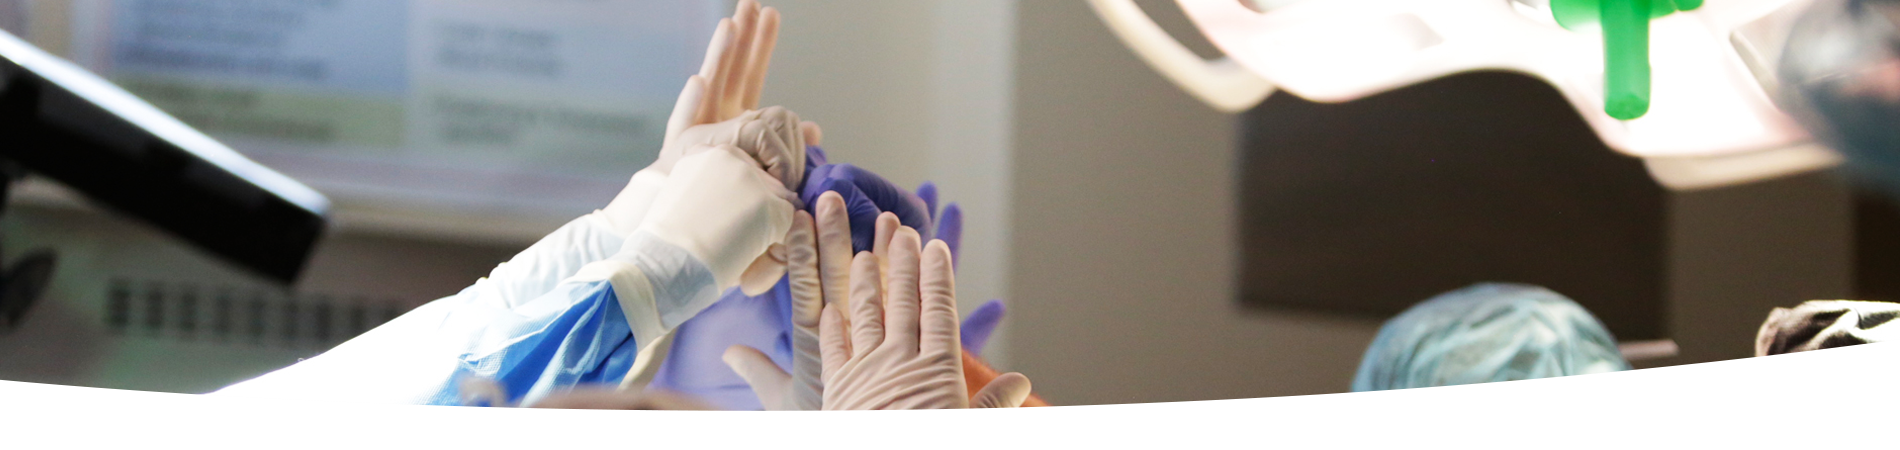 Close up of surgeon hands high fiving during operation